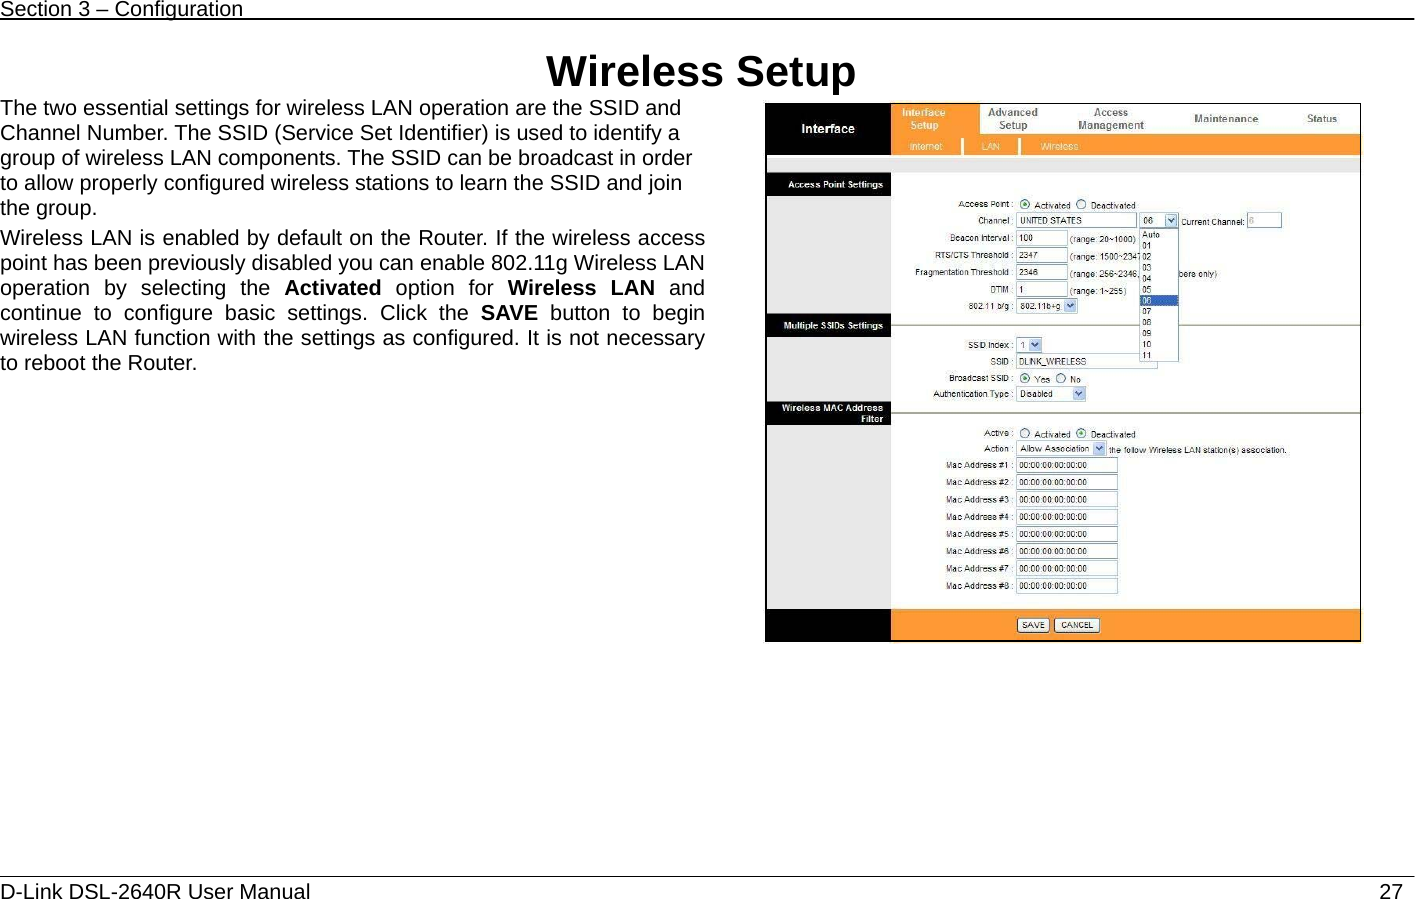 Section 3 – Configuration   D-Link DSL-2640R User Manual                           27Wireless Setup The two essential settings for wireless LAN operation are the SSID and Channel Number. The SSID (Service Set Identifier) is used to identify a group of wireless LAN components. The SSID can be broadcast in order to allow properly configured wireless stations to learn the SSID and join the group. Wireless LAN is enabled by default on the Router. If the wireless access point has been previously disabled you can enable 802.11g Wireless LAN operation by selecting the Activated option for Wireless LAN and continue to configure basic settings. Click the SAVE button to begin wireless LAN function with the settings as configured. It is not necessary to reboot the Router.     